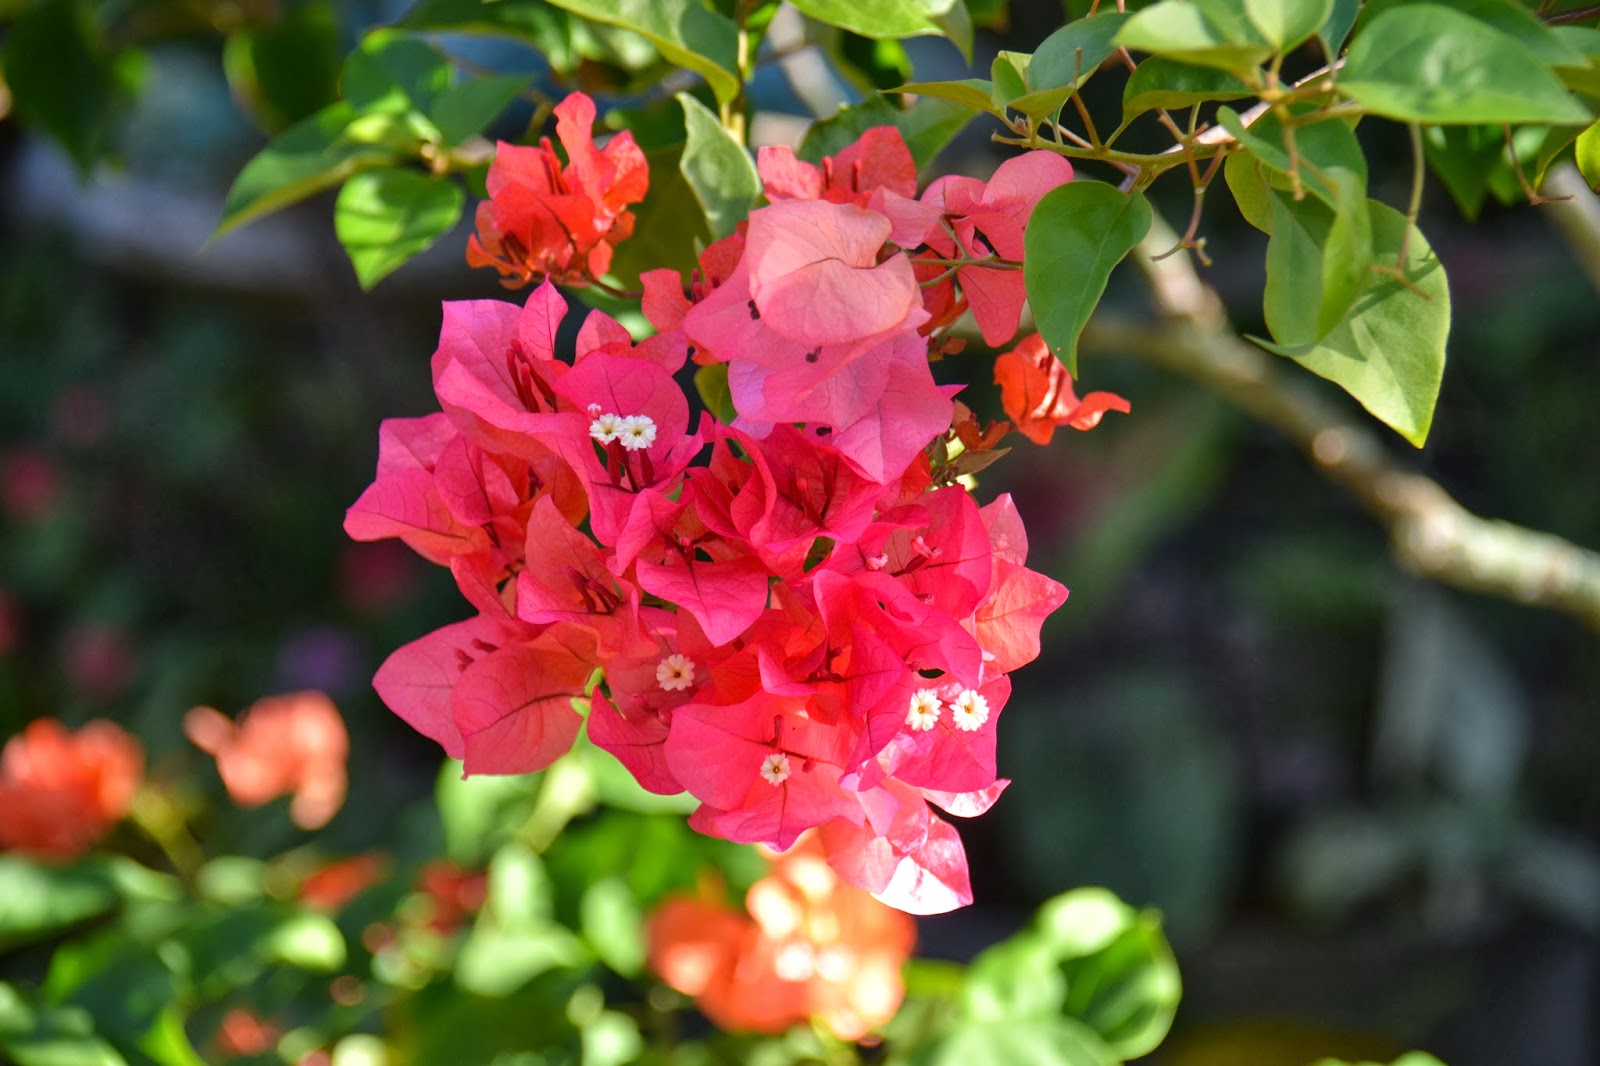 My Viewfinder: South Florida winter flowers